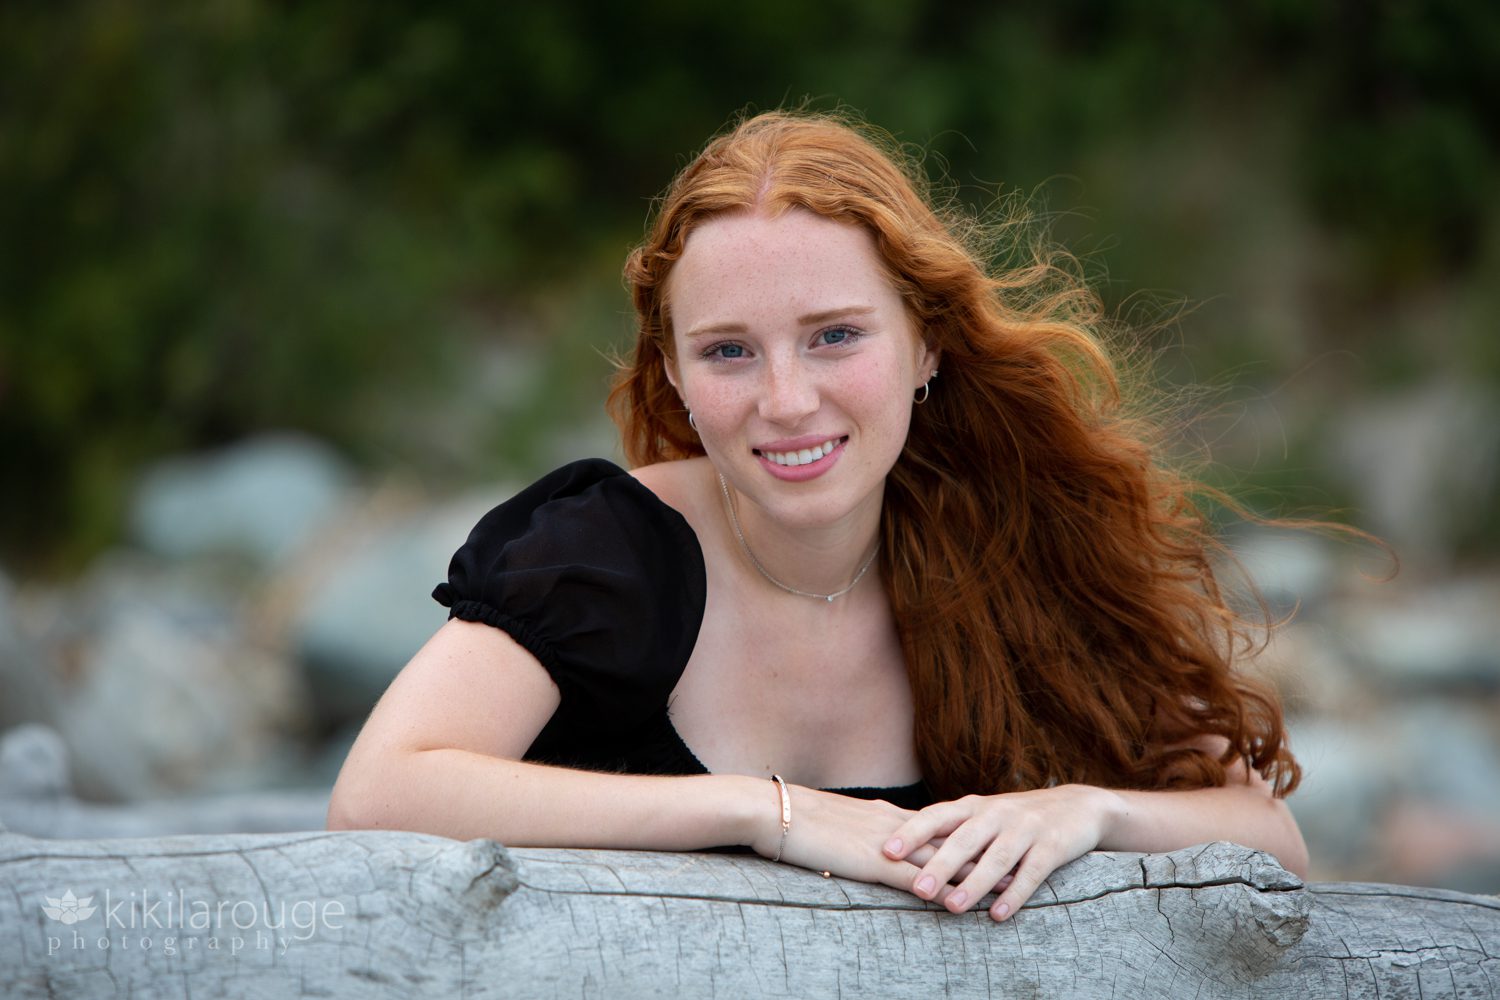 Redheaded girl smiling leaning on driftwood at beach with black top